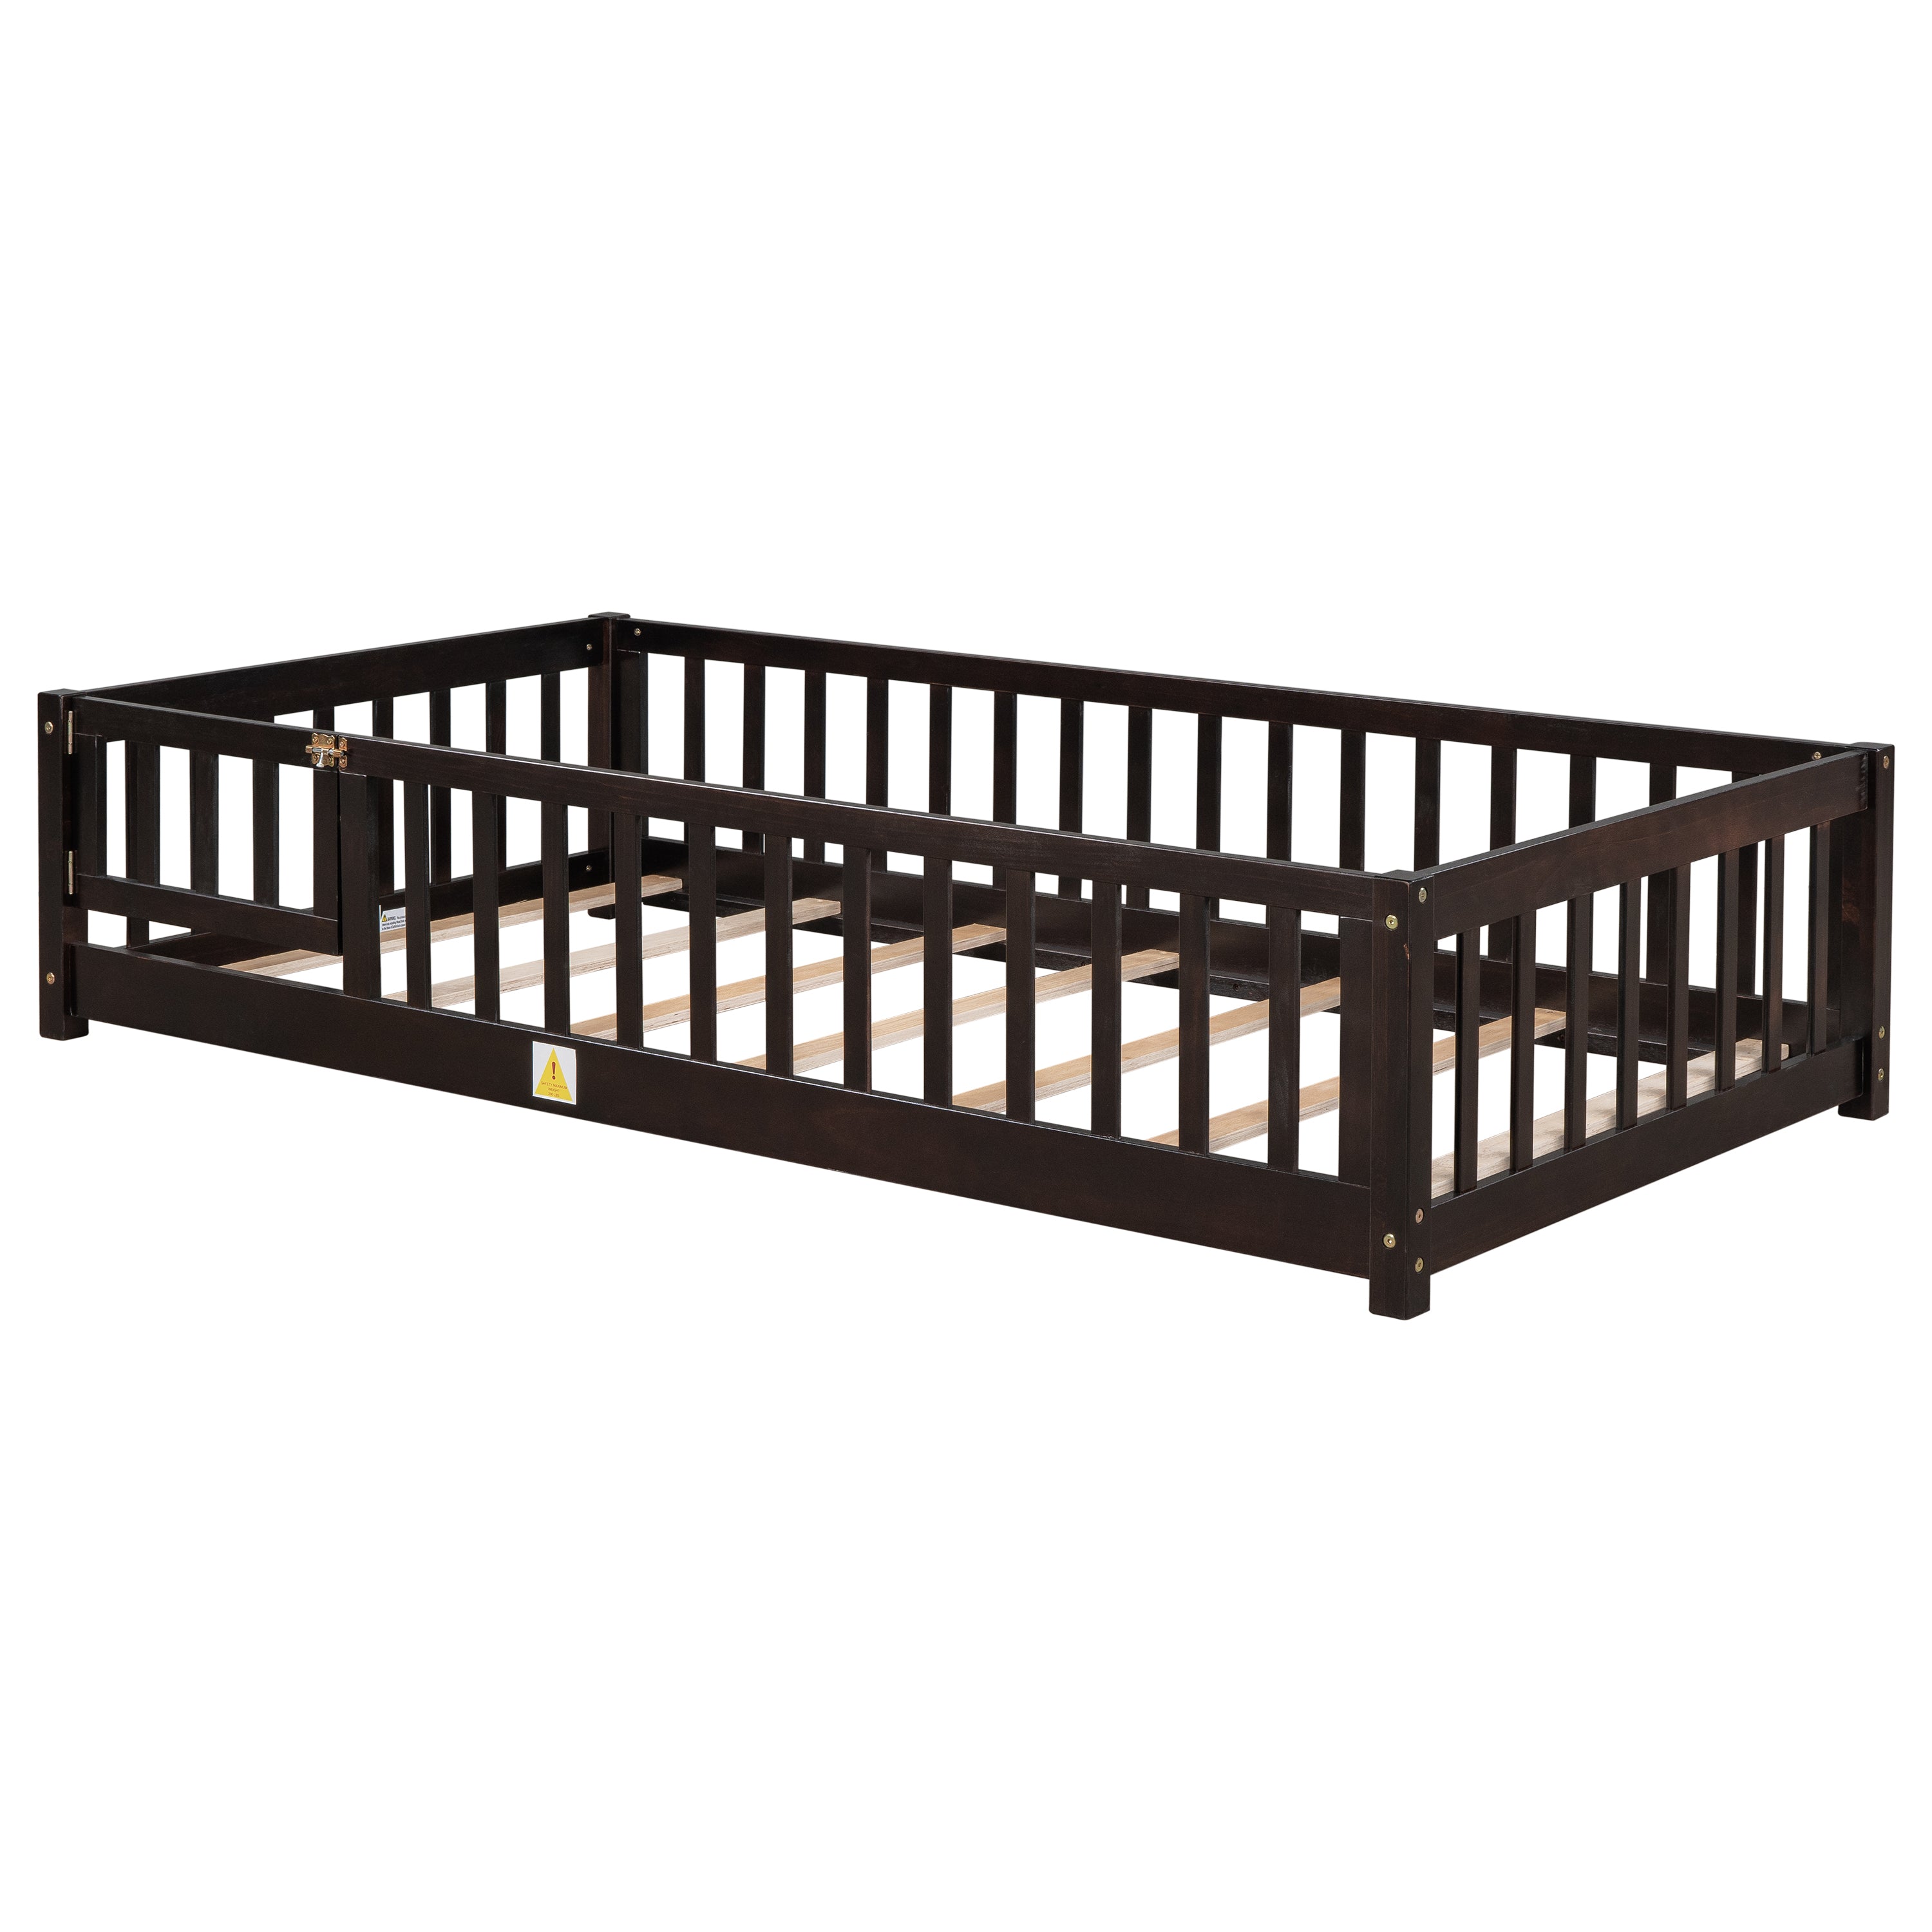 uhomepro Twin Size Wood Floor Bed Frame with Fence and Door for Kids, Toddlers, Espresso